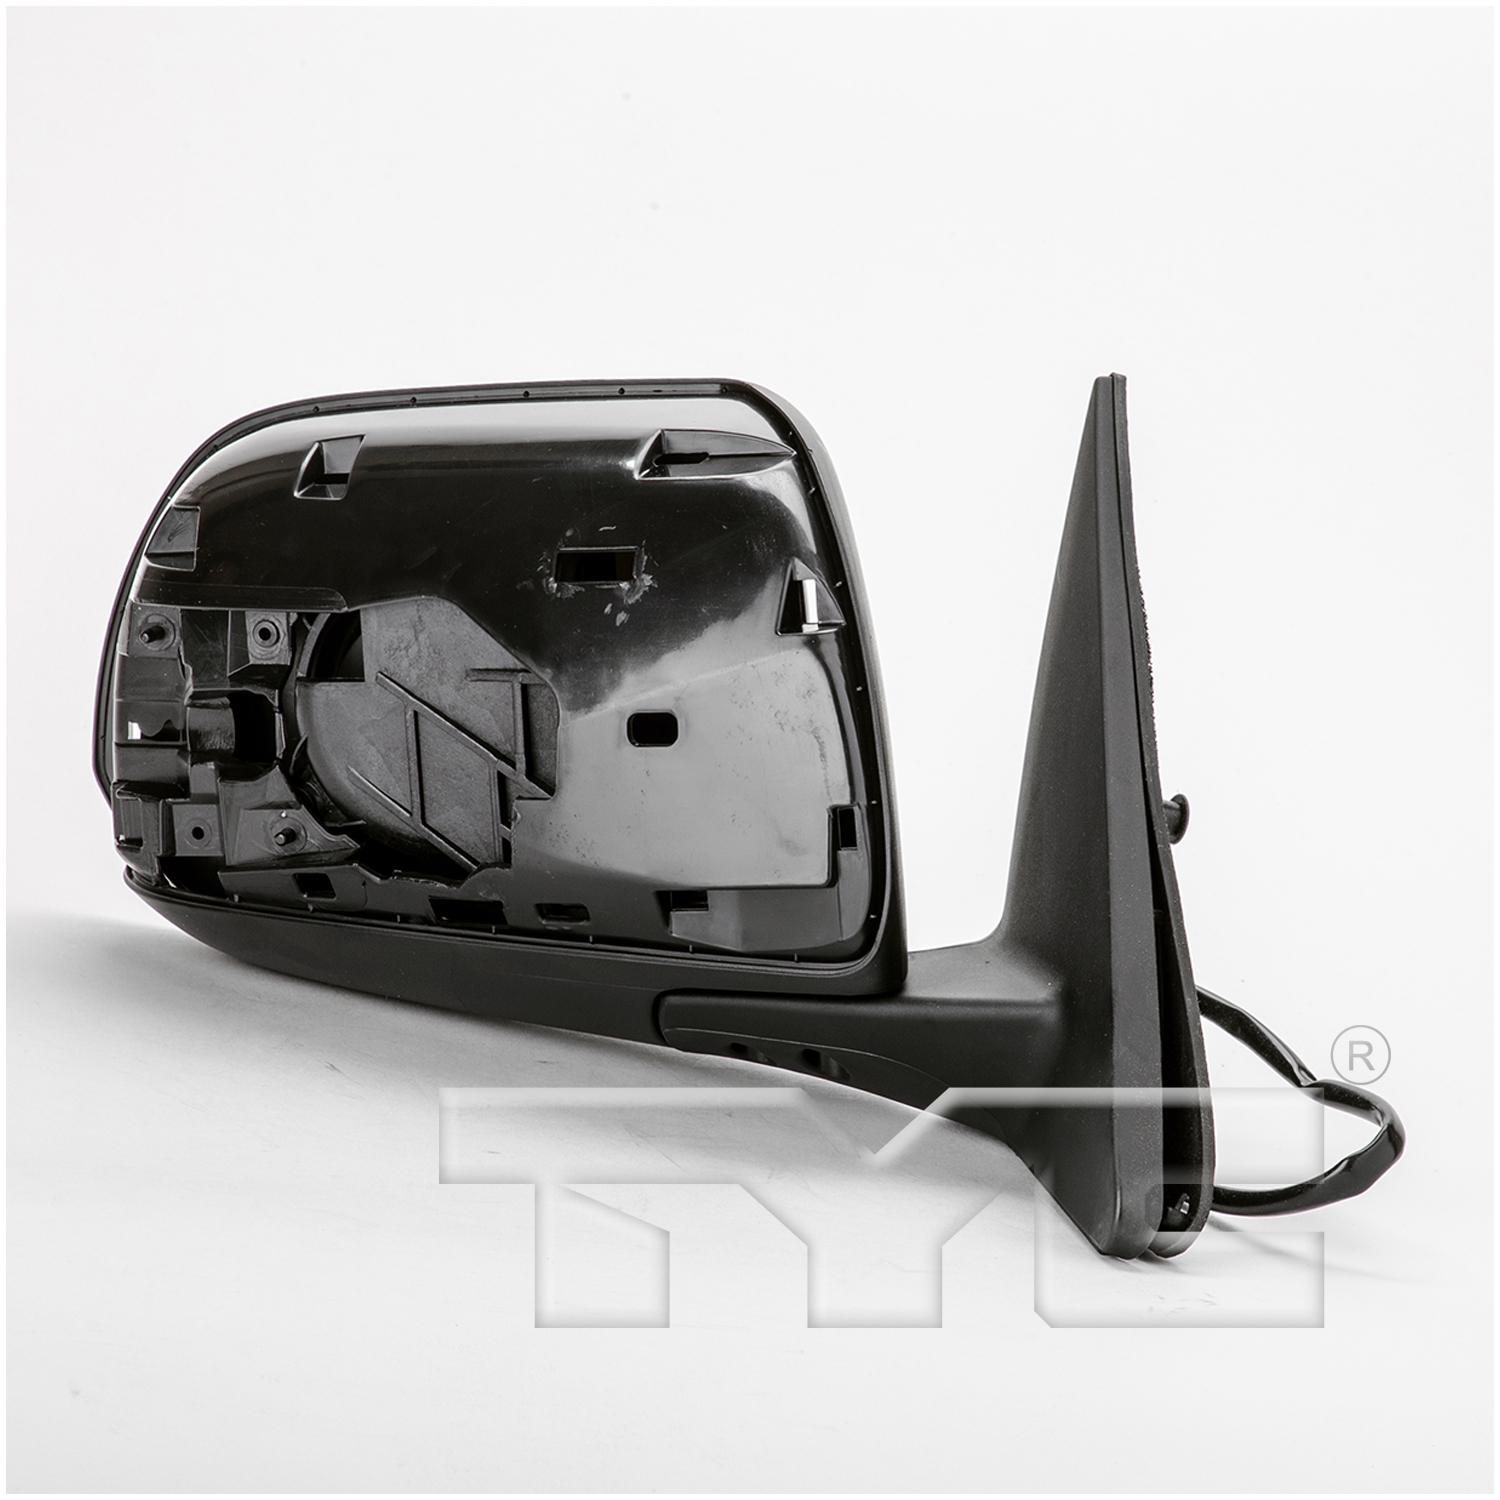 Aftermarket MIRRORS for TOYOTA - HIGHLANDER, HIGHLANDER,08-13,RT Mirror outside rear view